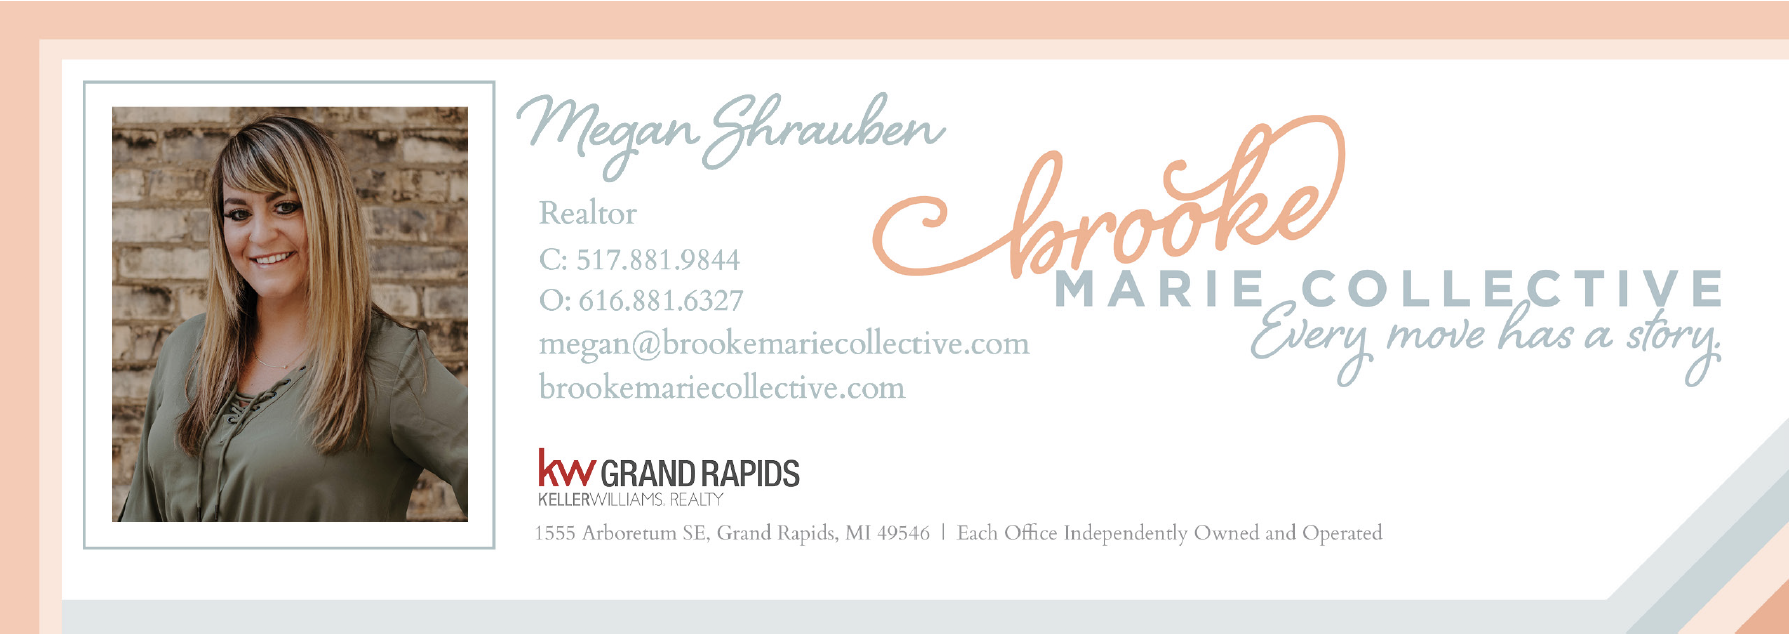 Email signature for Brooke Marie Collective.